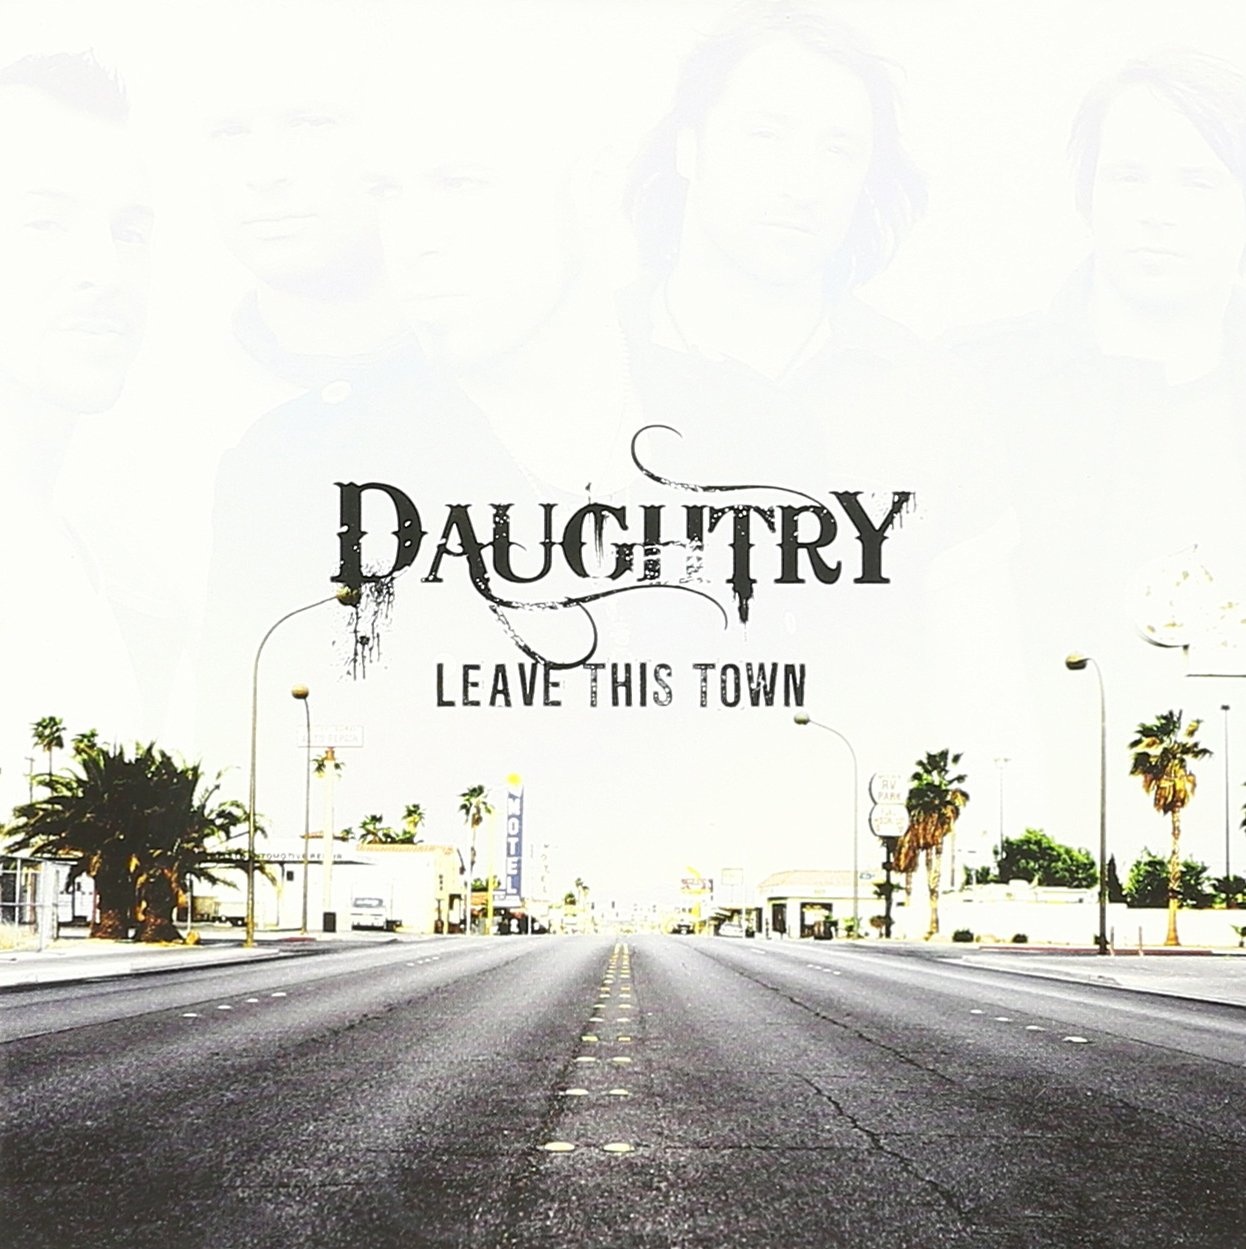 This town small. Daughtry lioness. Daughtry обложки альбомов. Обложка Daughtry lioness. Daughtry leave this Town.